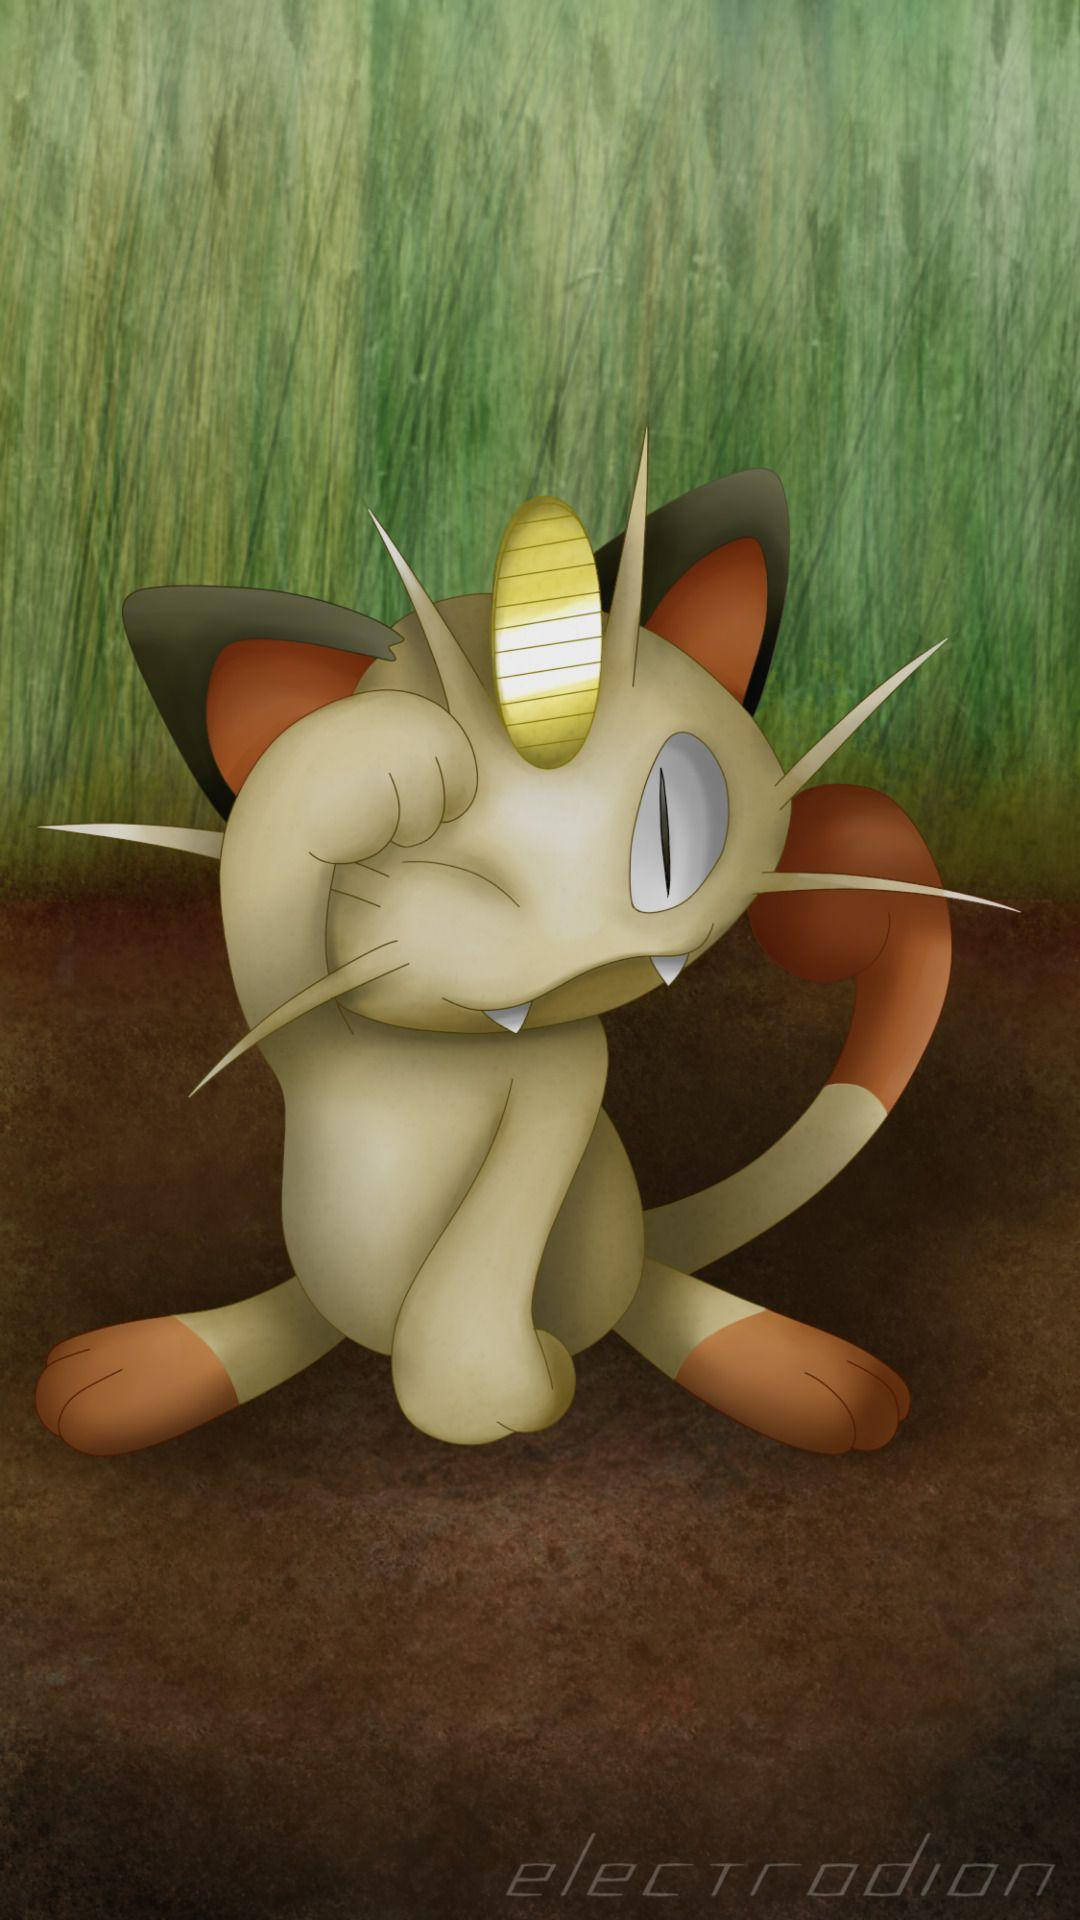 Meowth Strikes Cute And Catlike Pose Wallpaper